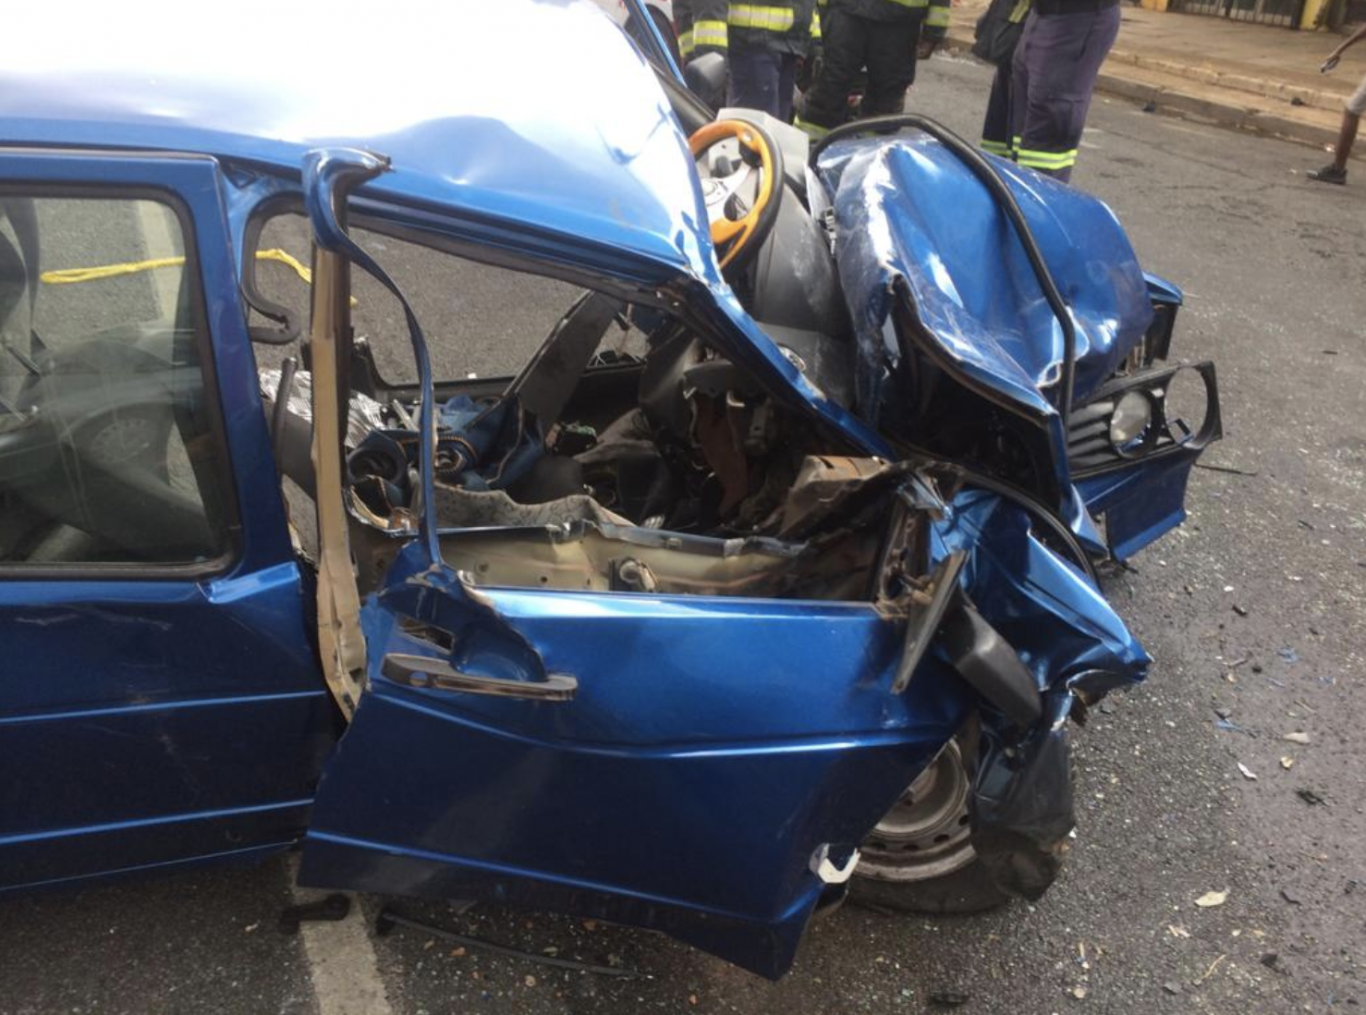 Three-vehicle collision leaves five injured in Dicovery, west of Johannesburg